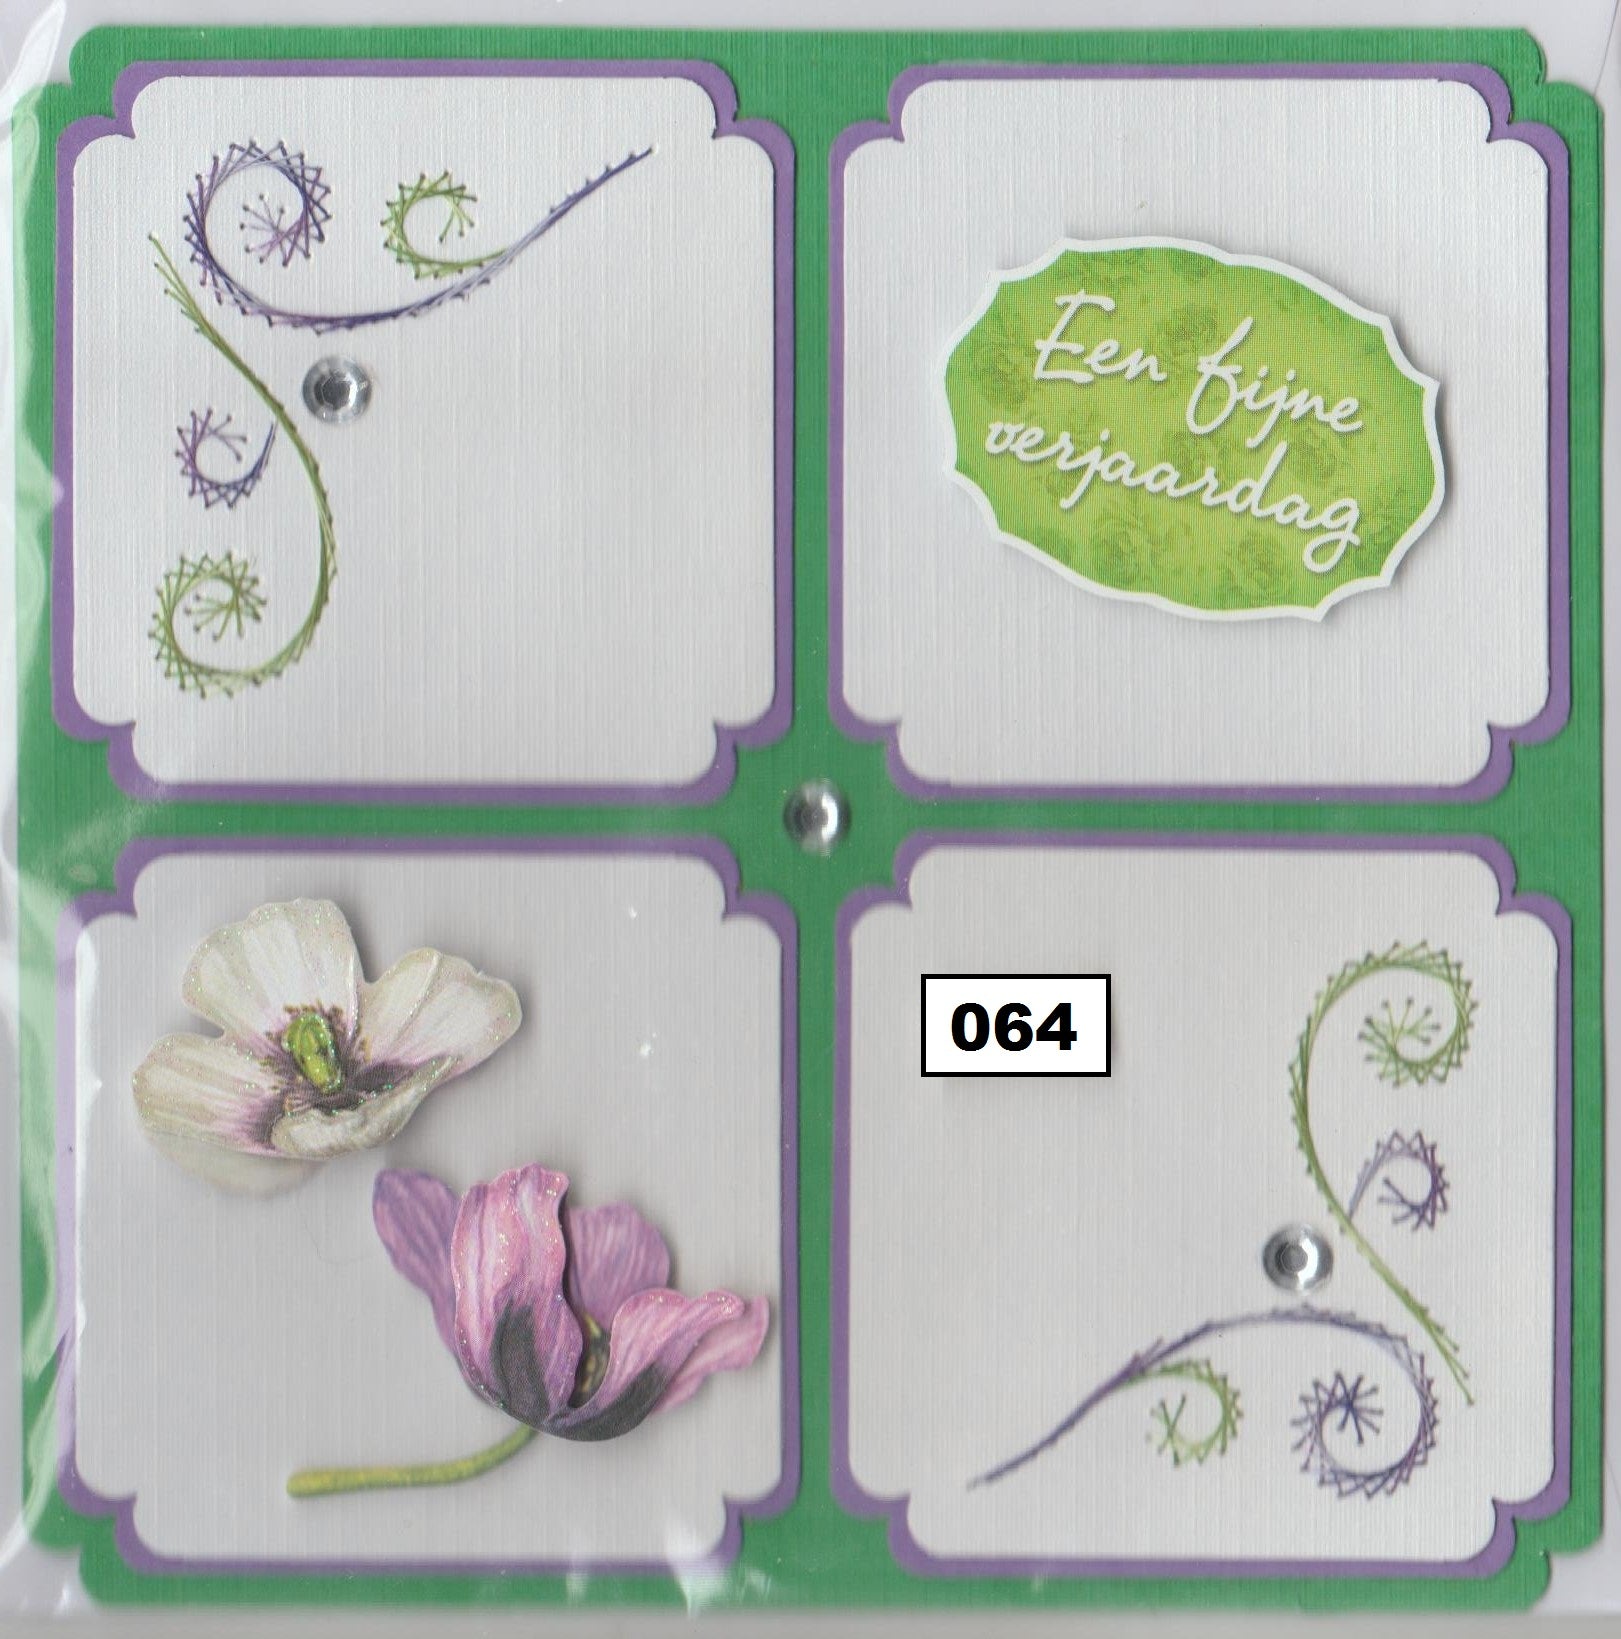 Laura's Design Digital Embroidery Pattern - Four Corners 2